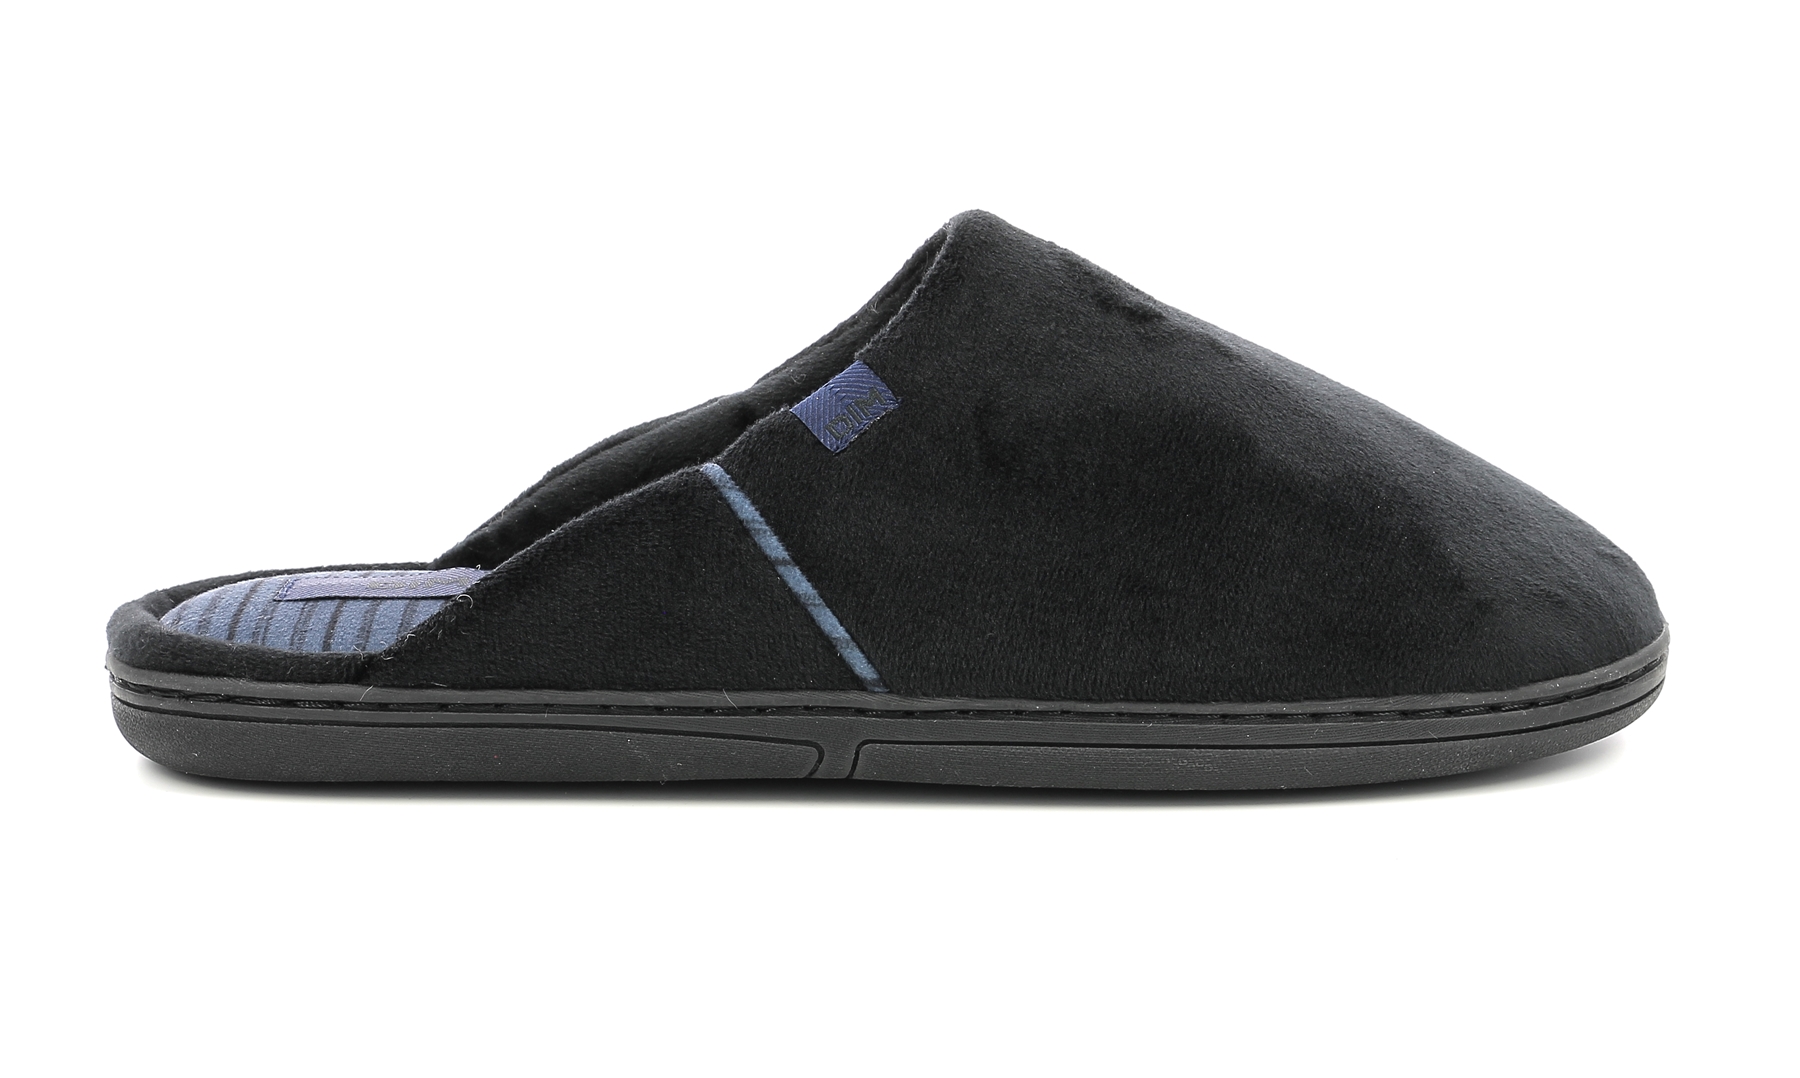 Soft black and blue slippers for men